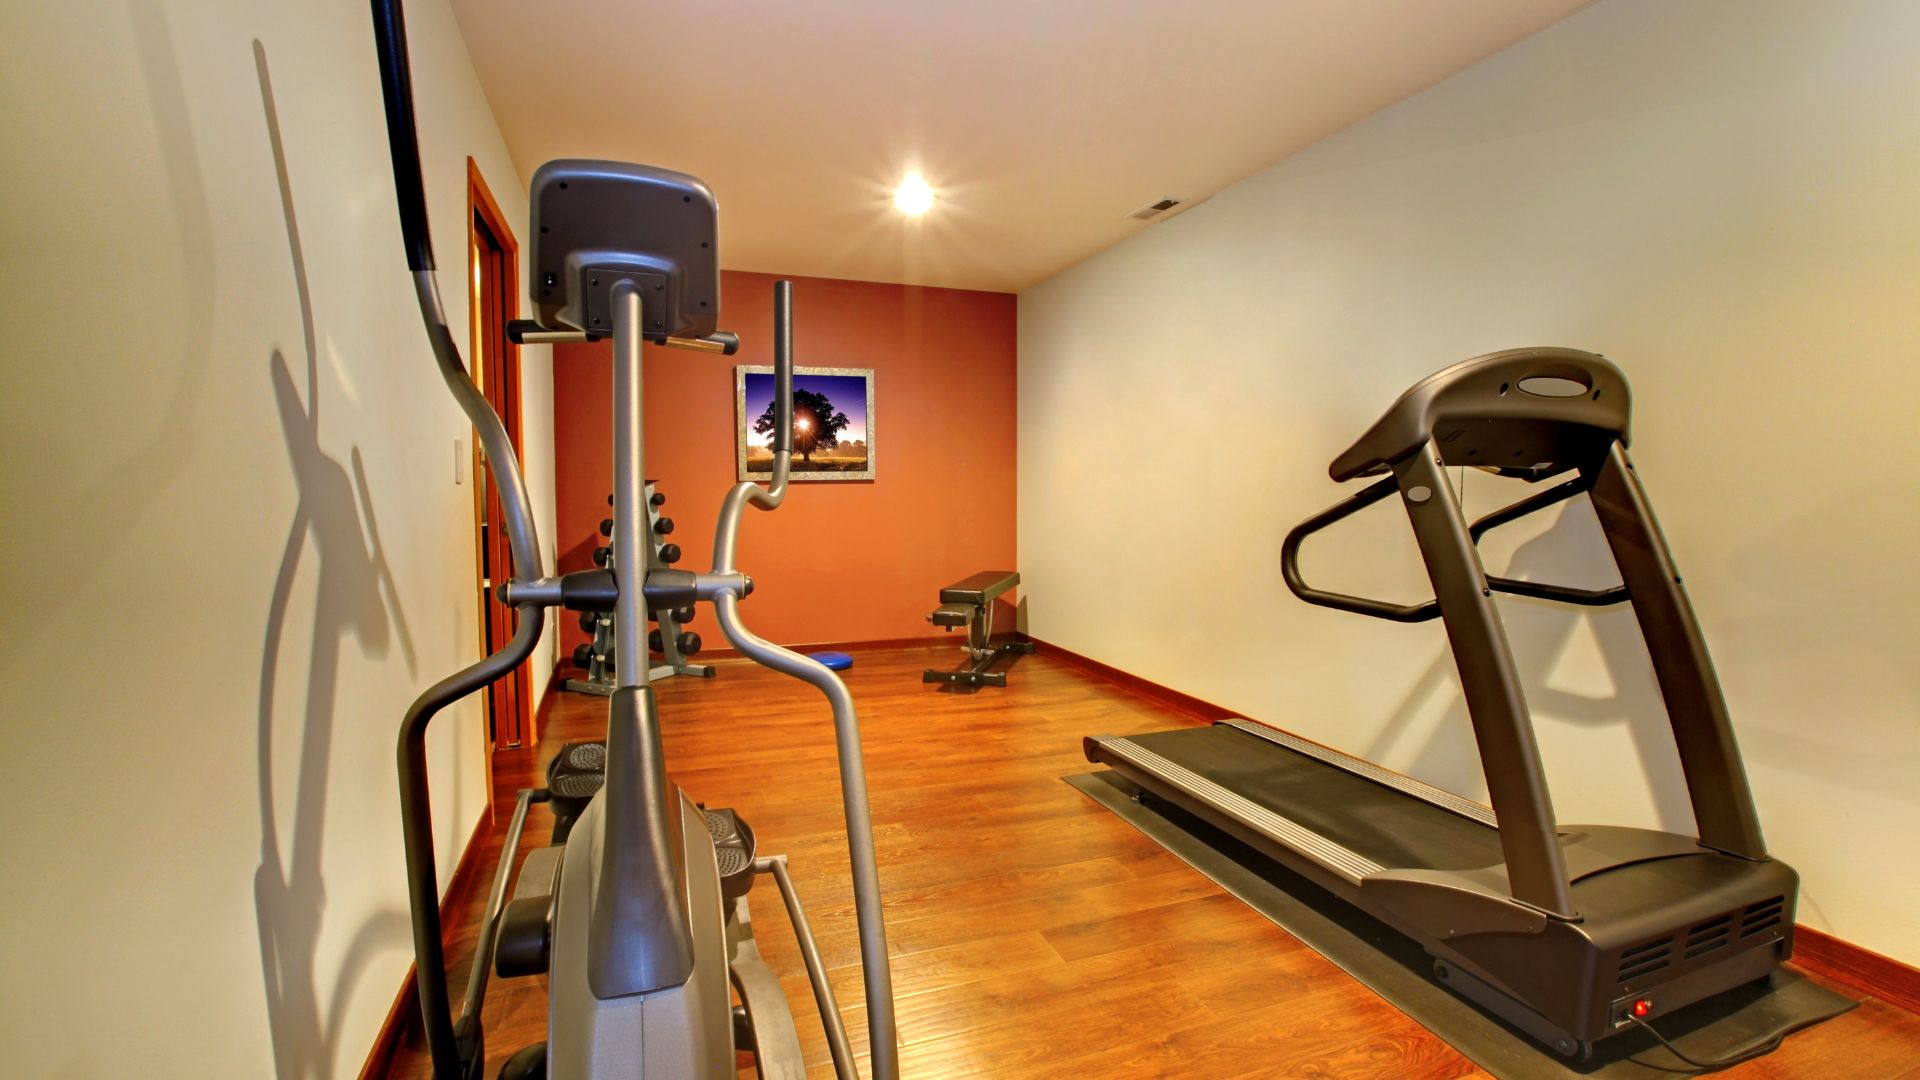 Basement gym room with elliptical bike, treadmill and weightlifting materials